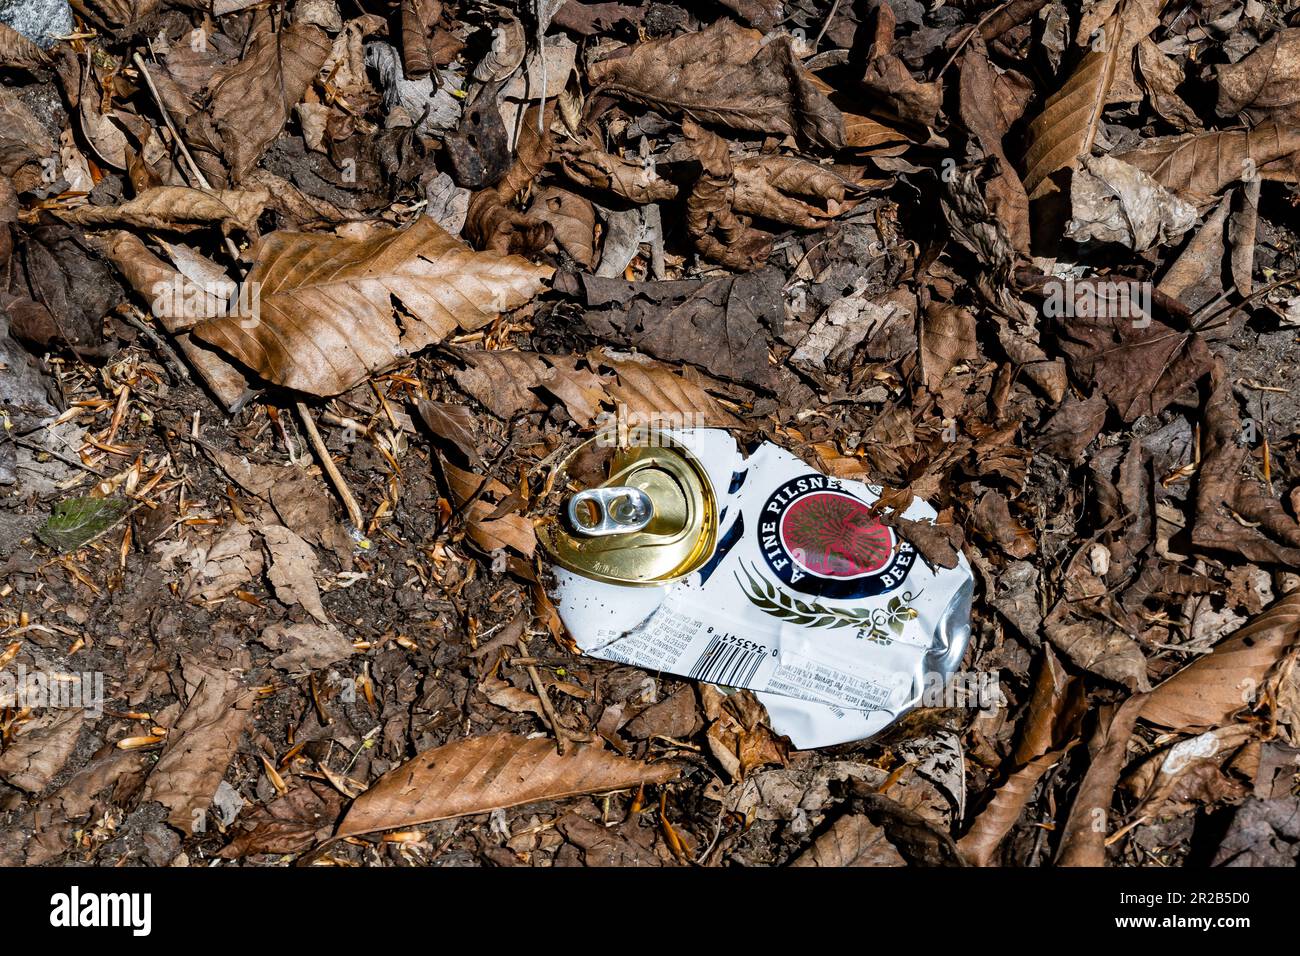 A crushed flattened Miller Lite beer can thrown in the leaves in the Adirondack Mountains, NY USA Stock Photo